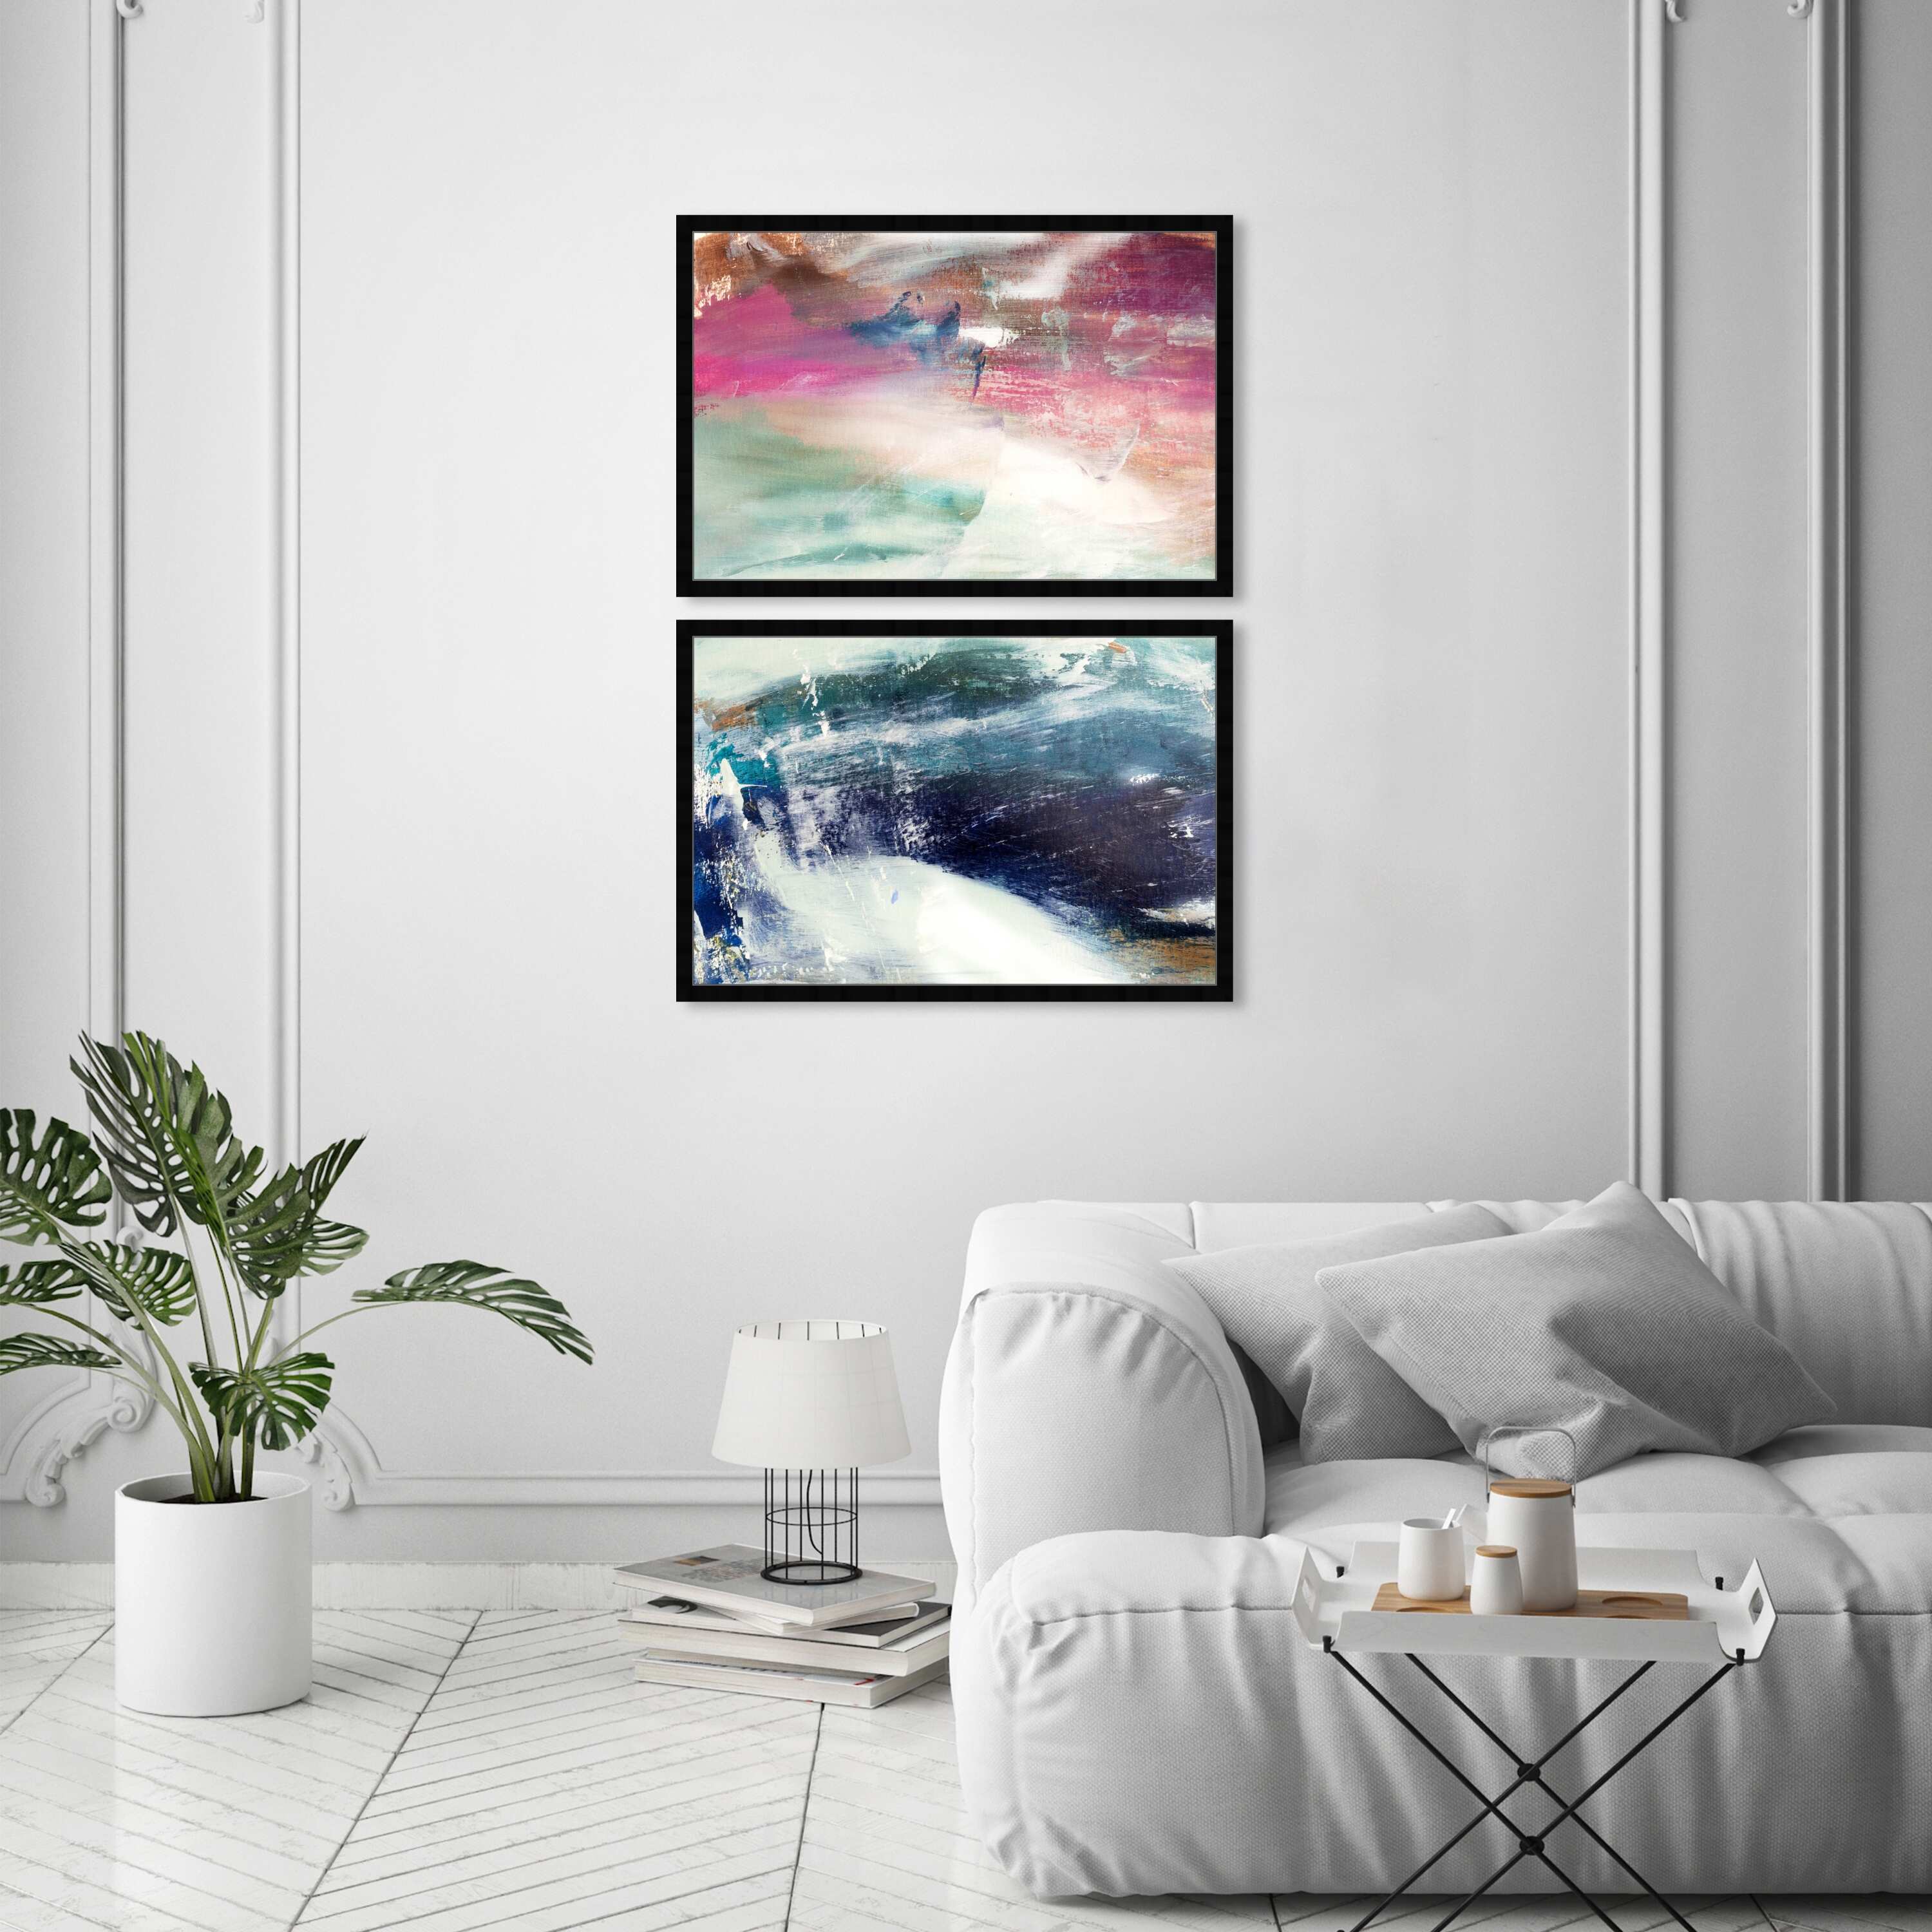 Oliver Gal 'Colorful Ocean Textures' Abstract Pink Wall Art Canvas Print